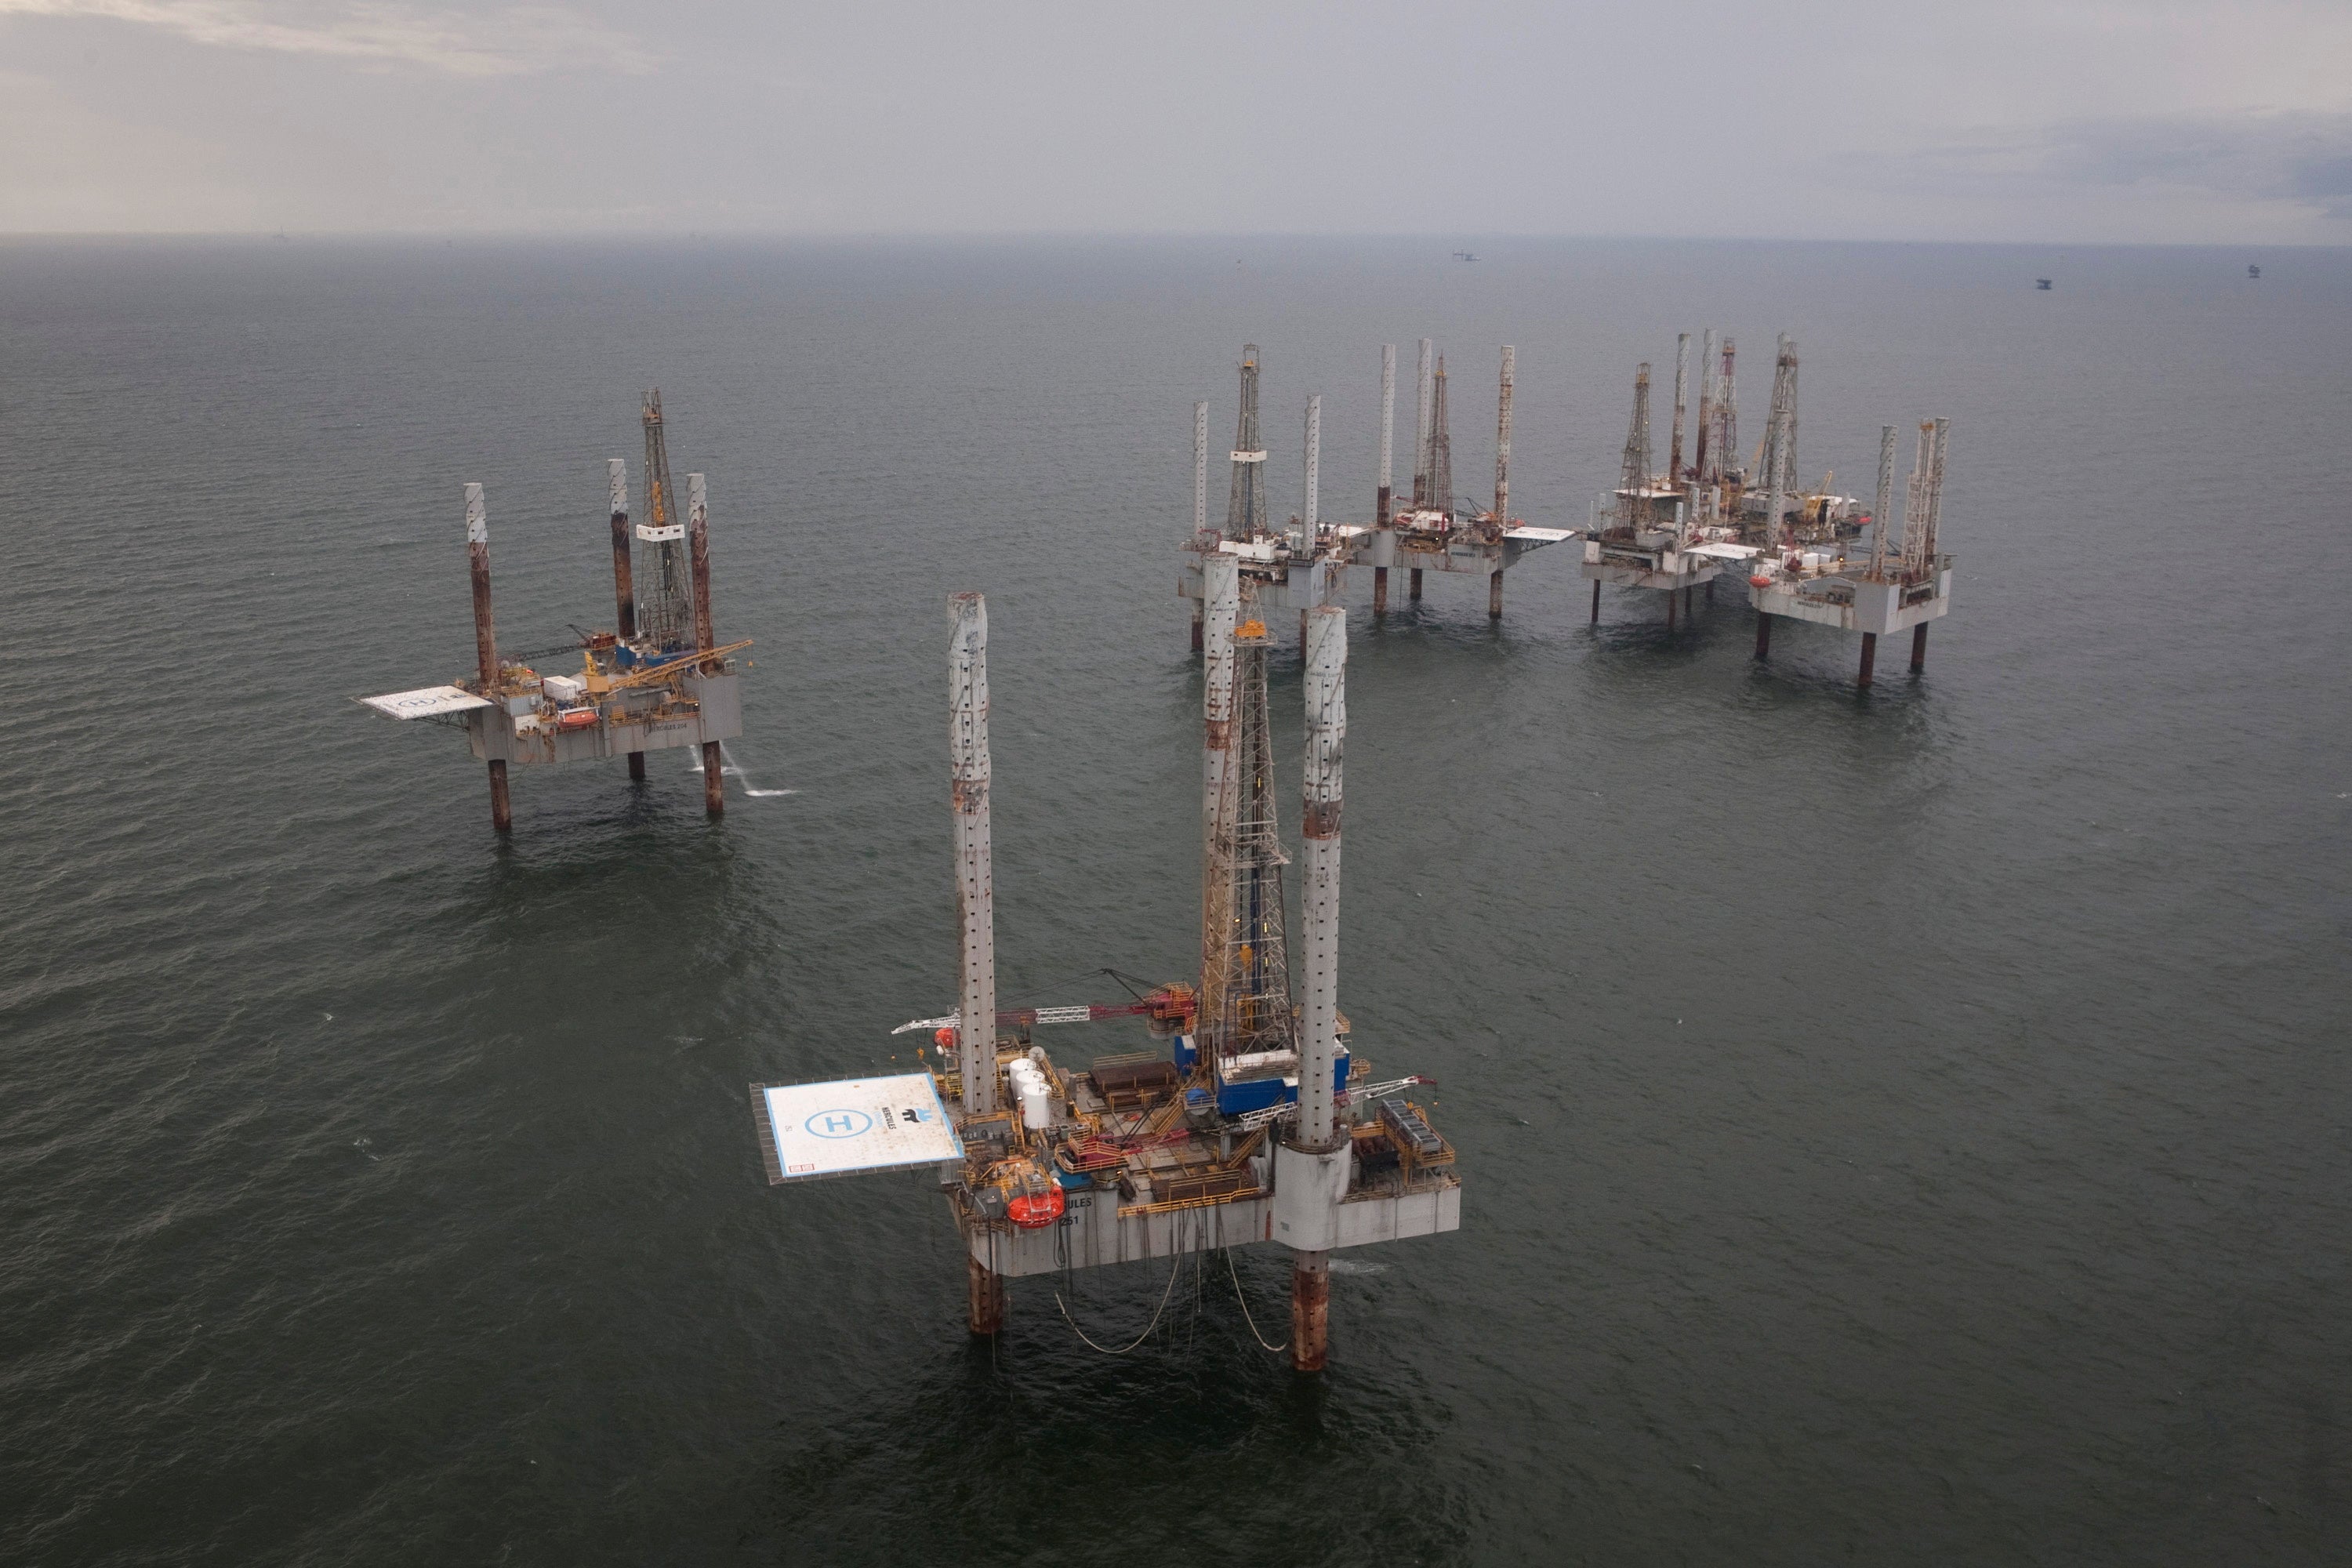 Unused oil rigs in the Gulf of Mexico in 2010